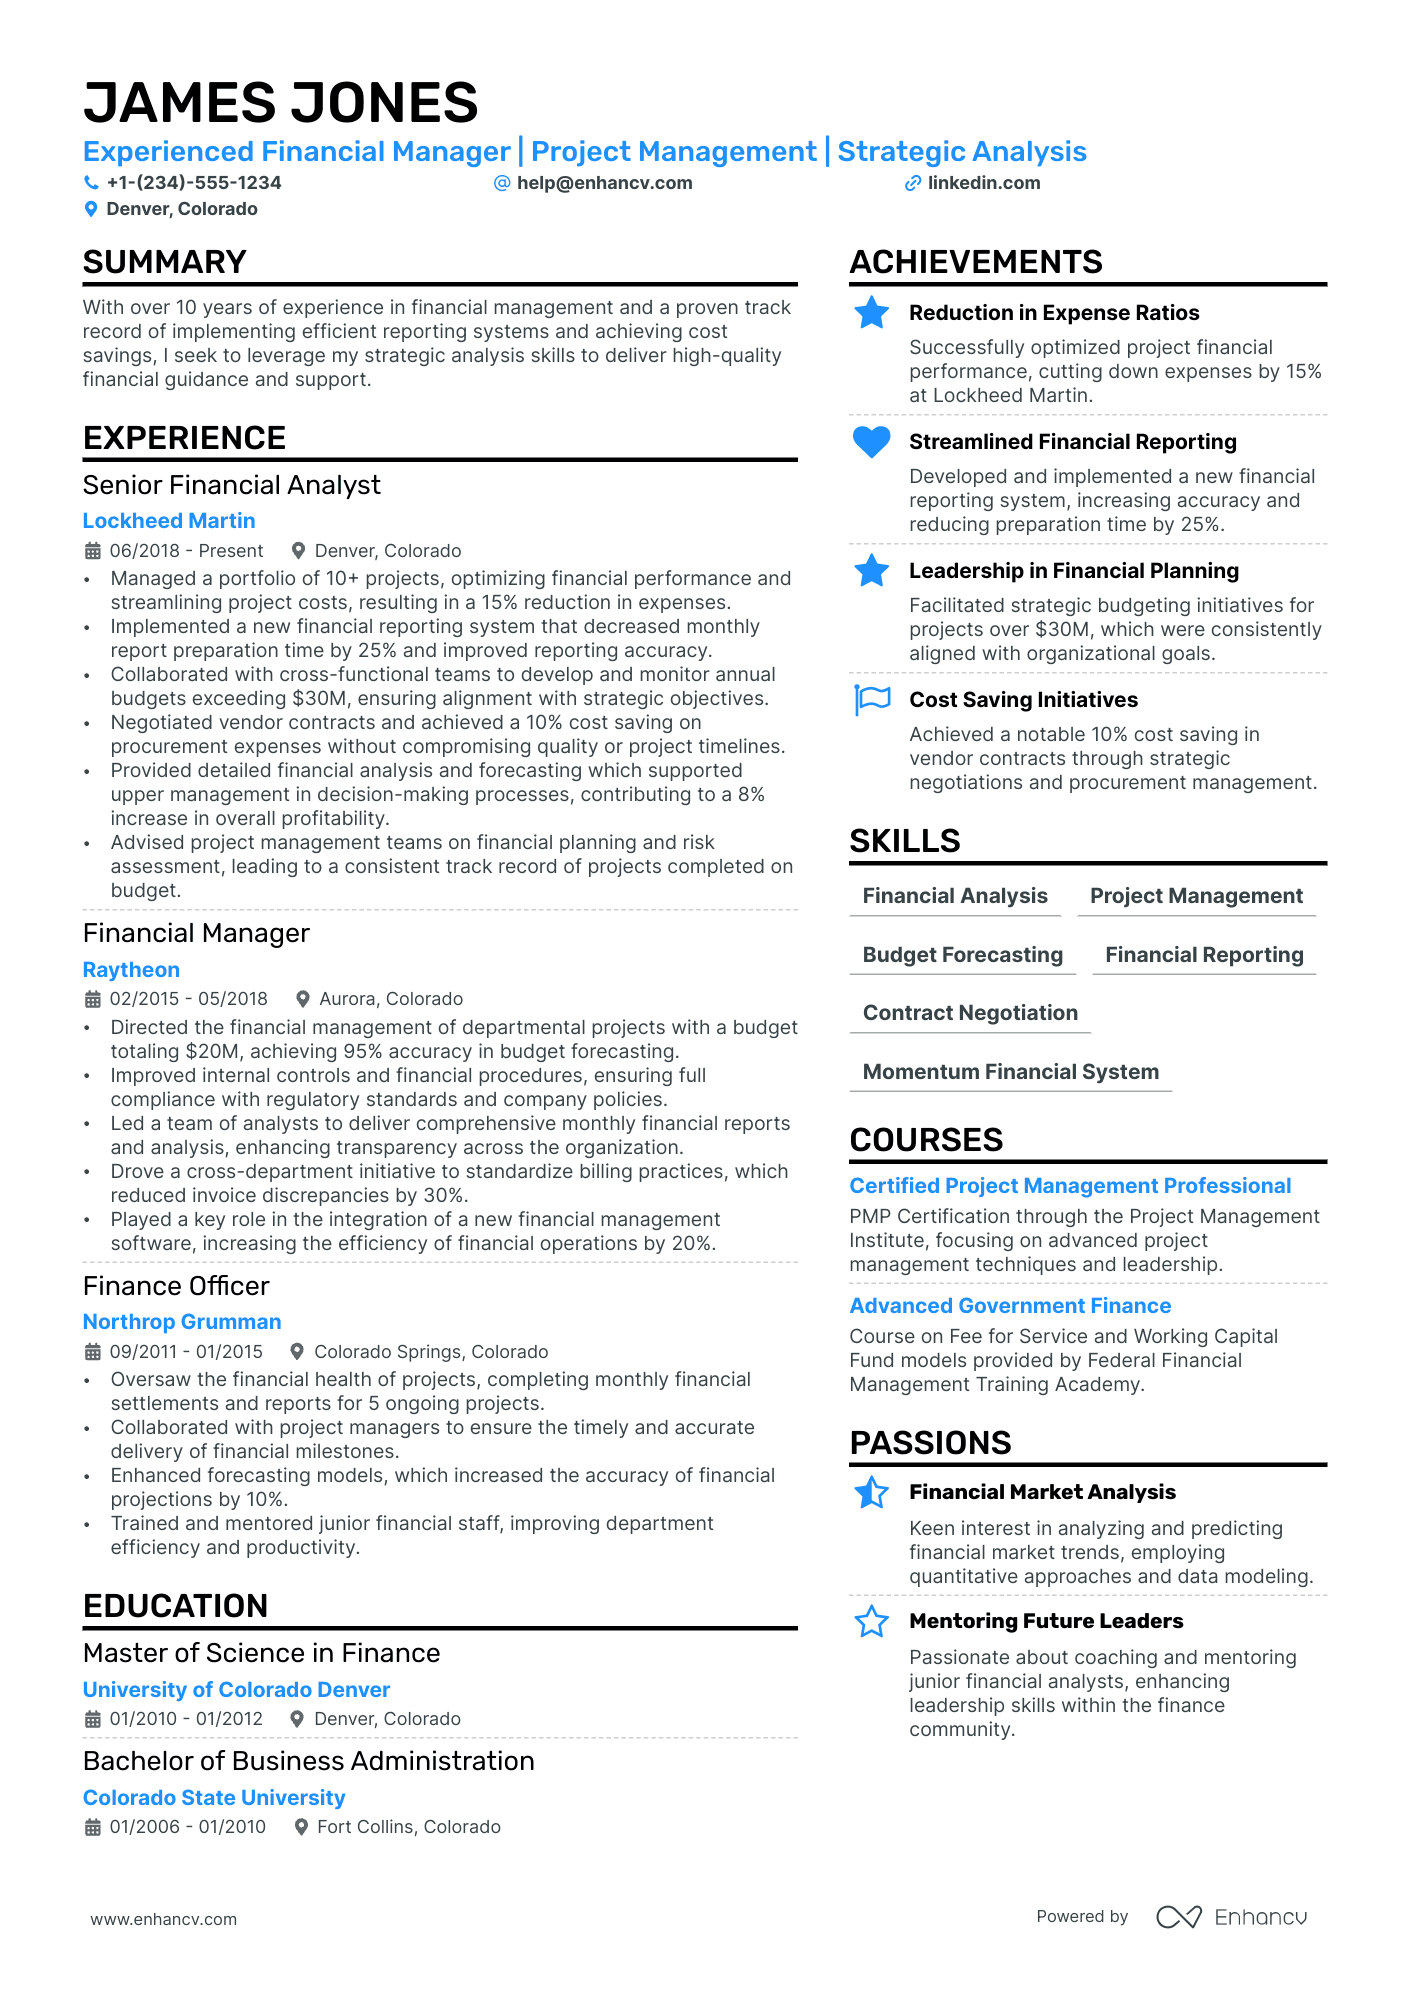 Customer Account Manager resume example